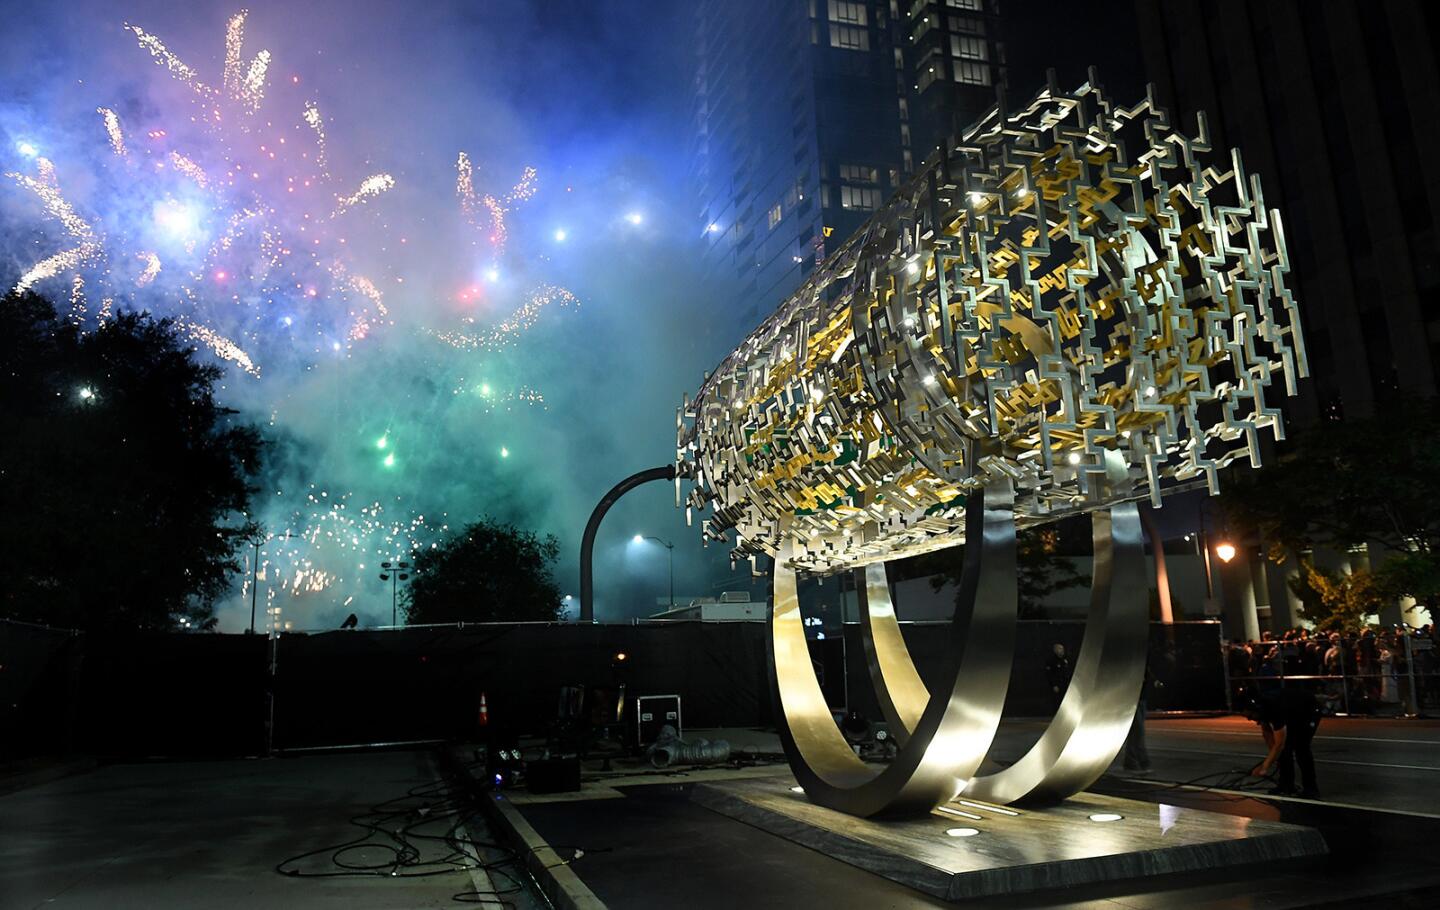 Fireworks are set off behind the Freedom Sculpture during an unveiling Tuesday.